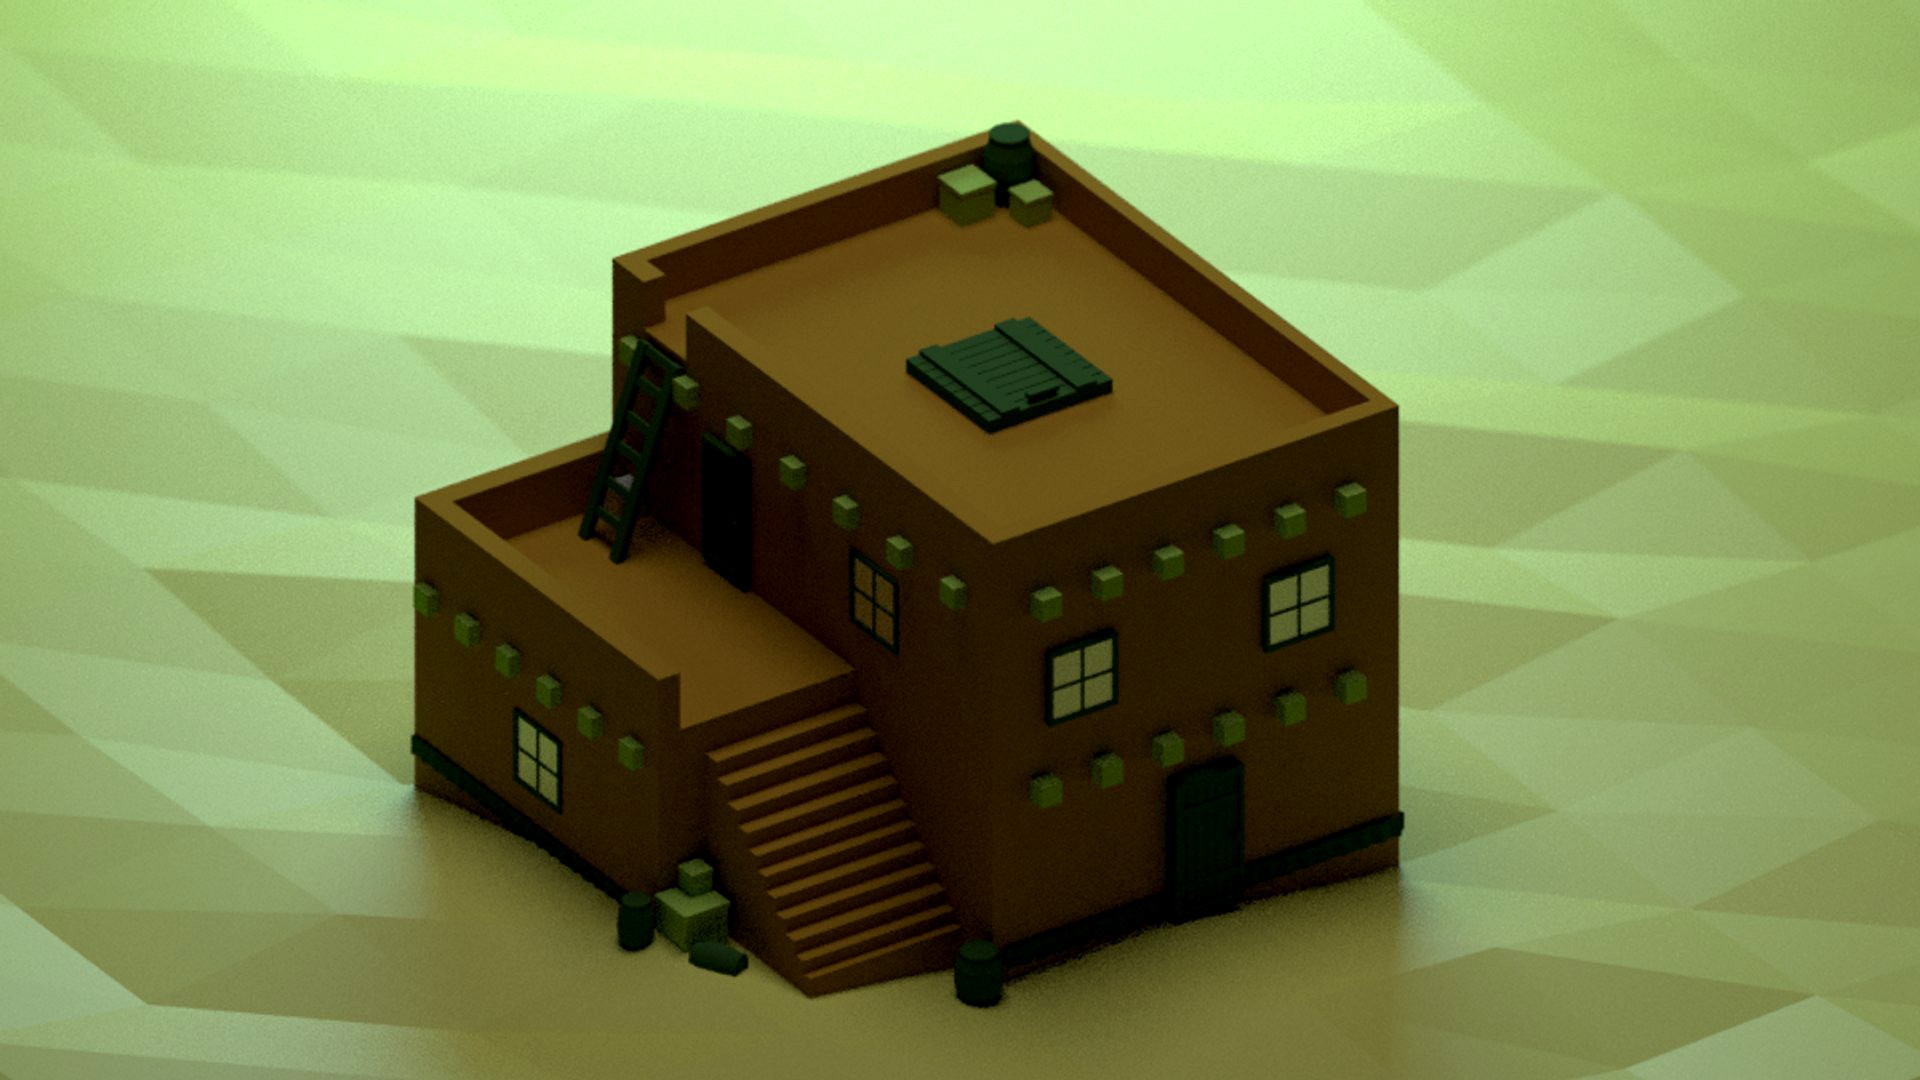 low poly house for the gameresidential private house